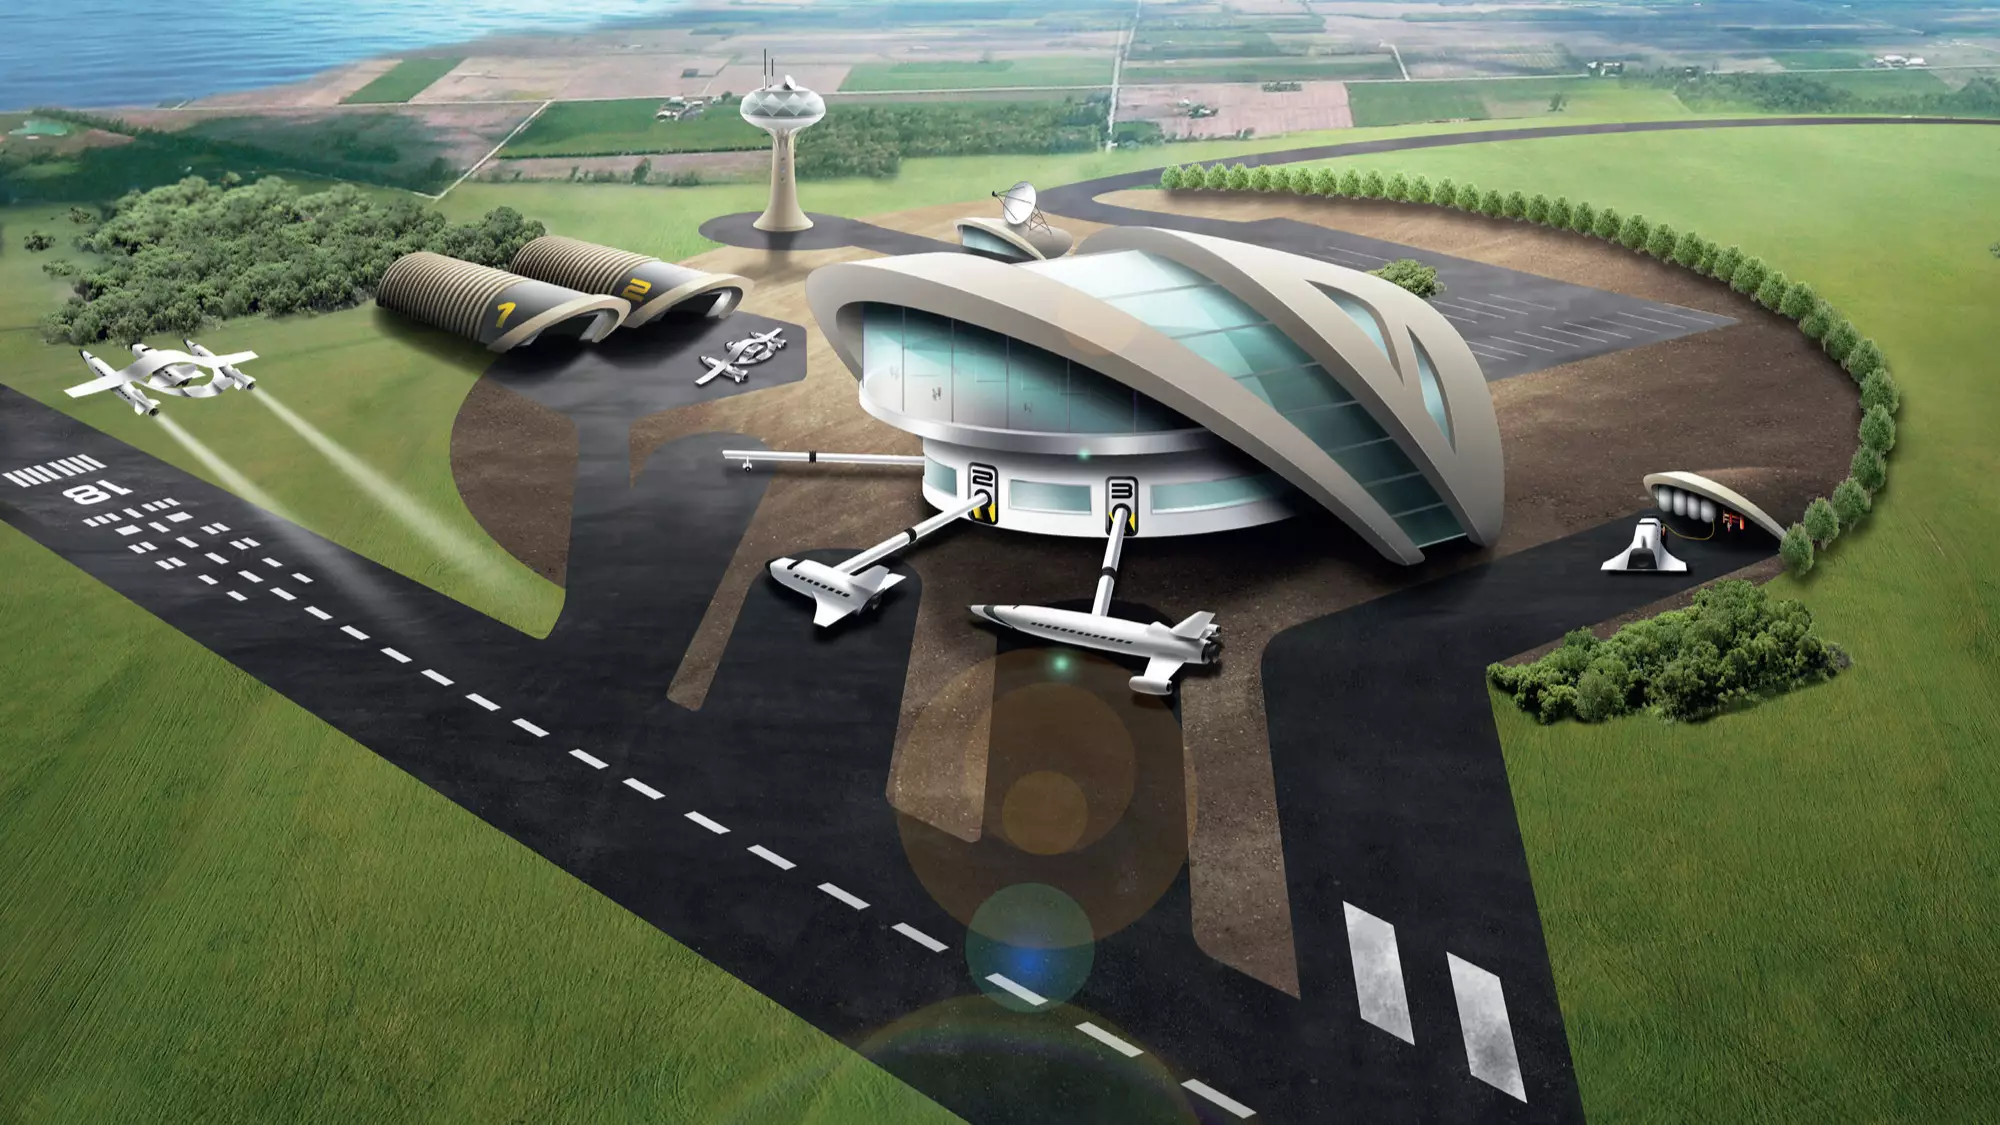 New US/UK Deal Brings Spaceport In Cornwall Closer To Reality